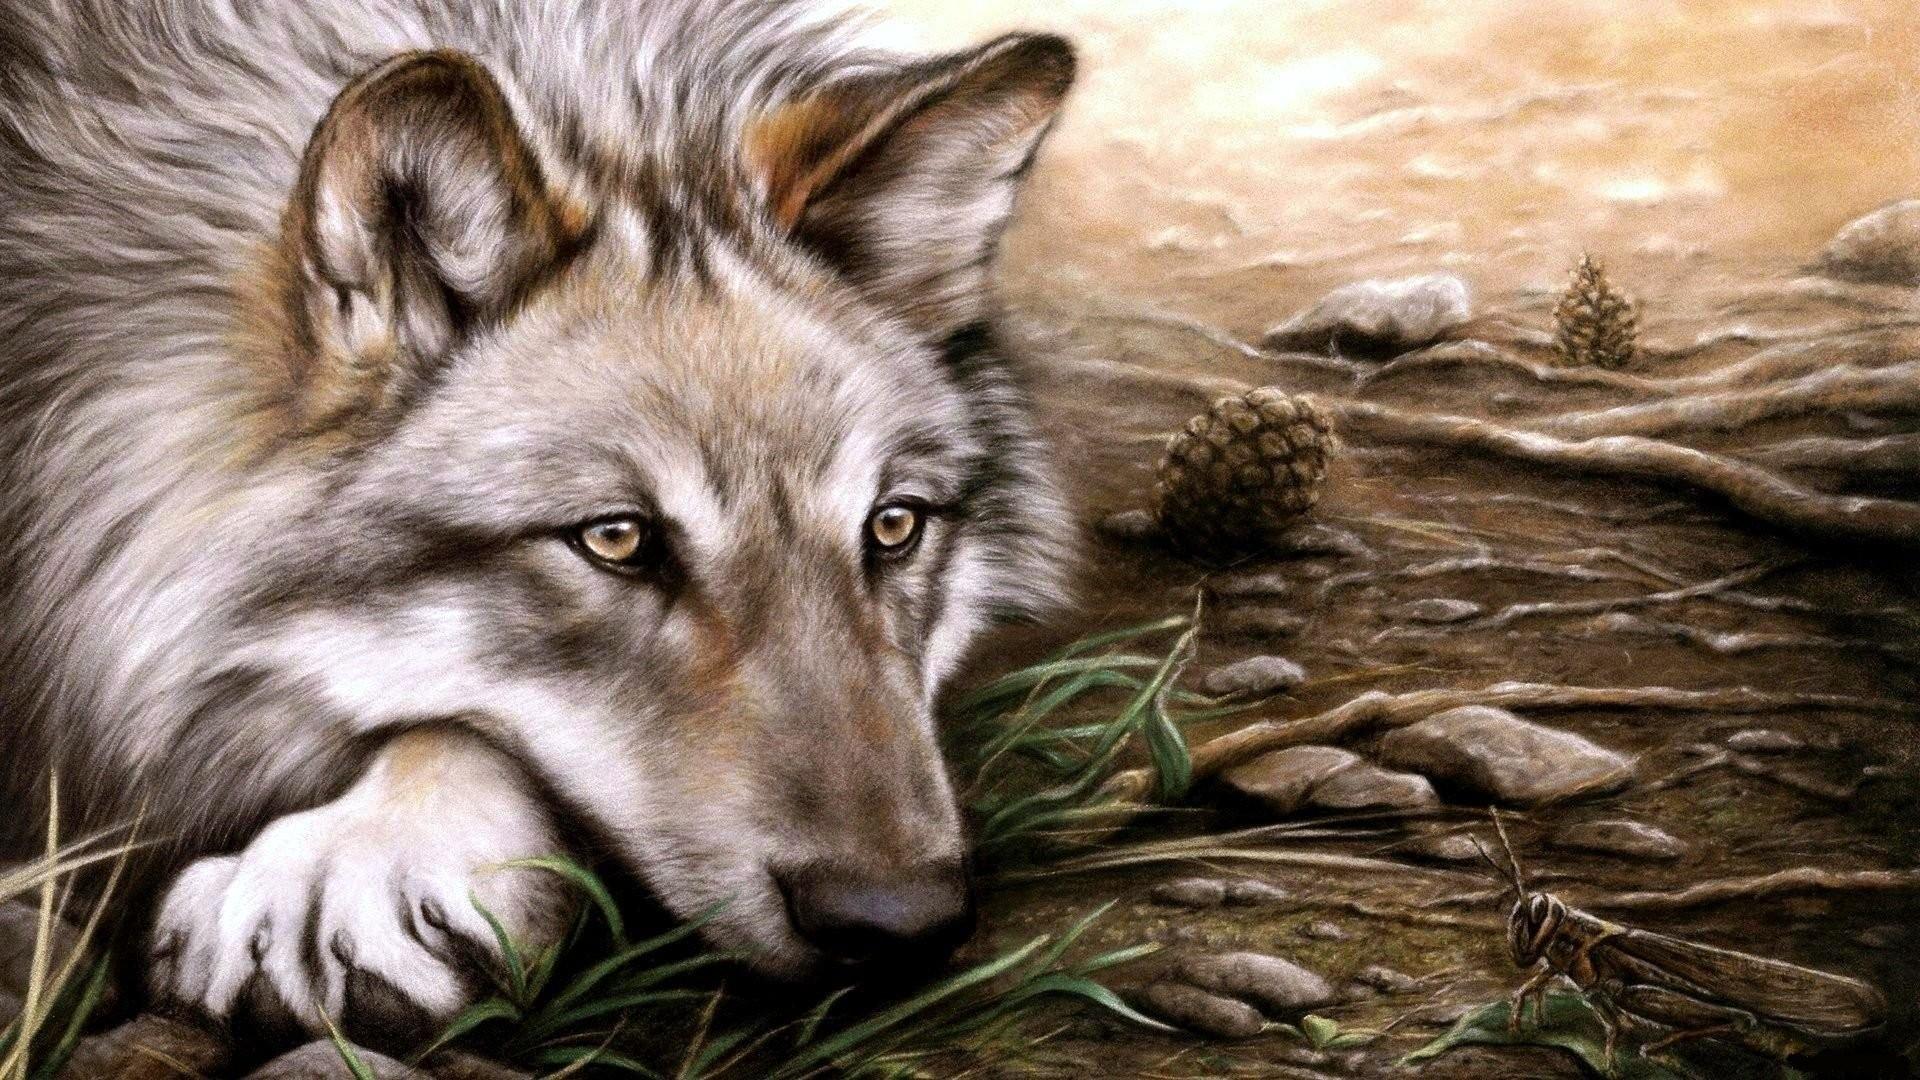 Dogs: Art Wolf Dog Wallpaper Wide for HD 16:9 High Definition 1080p